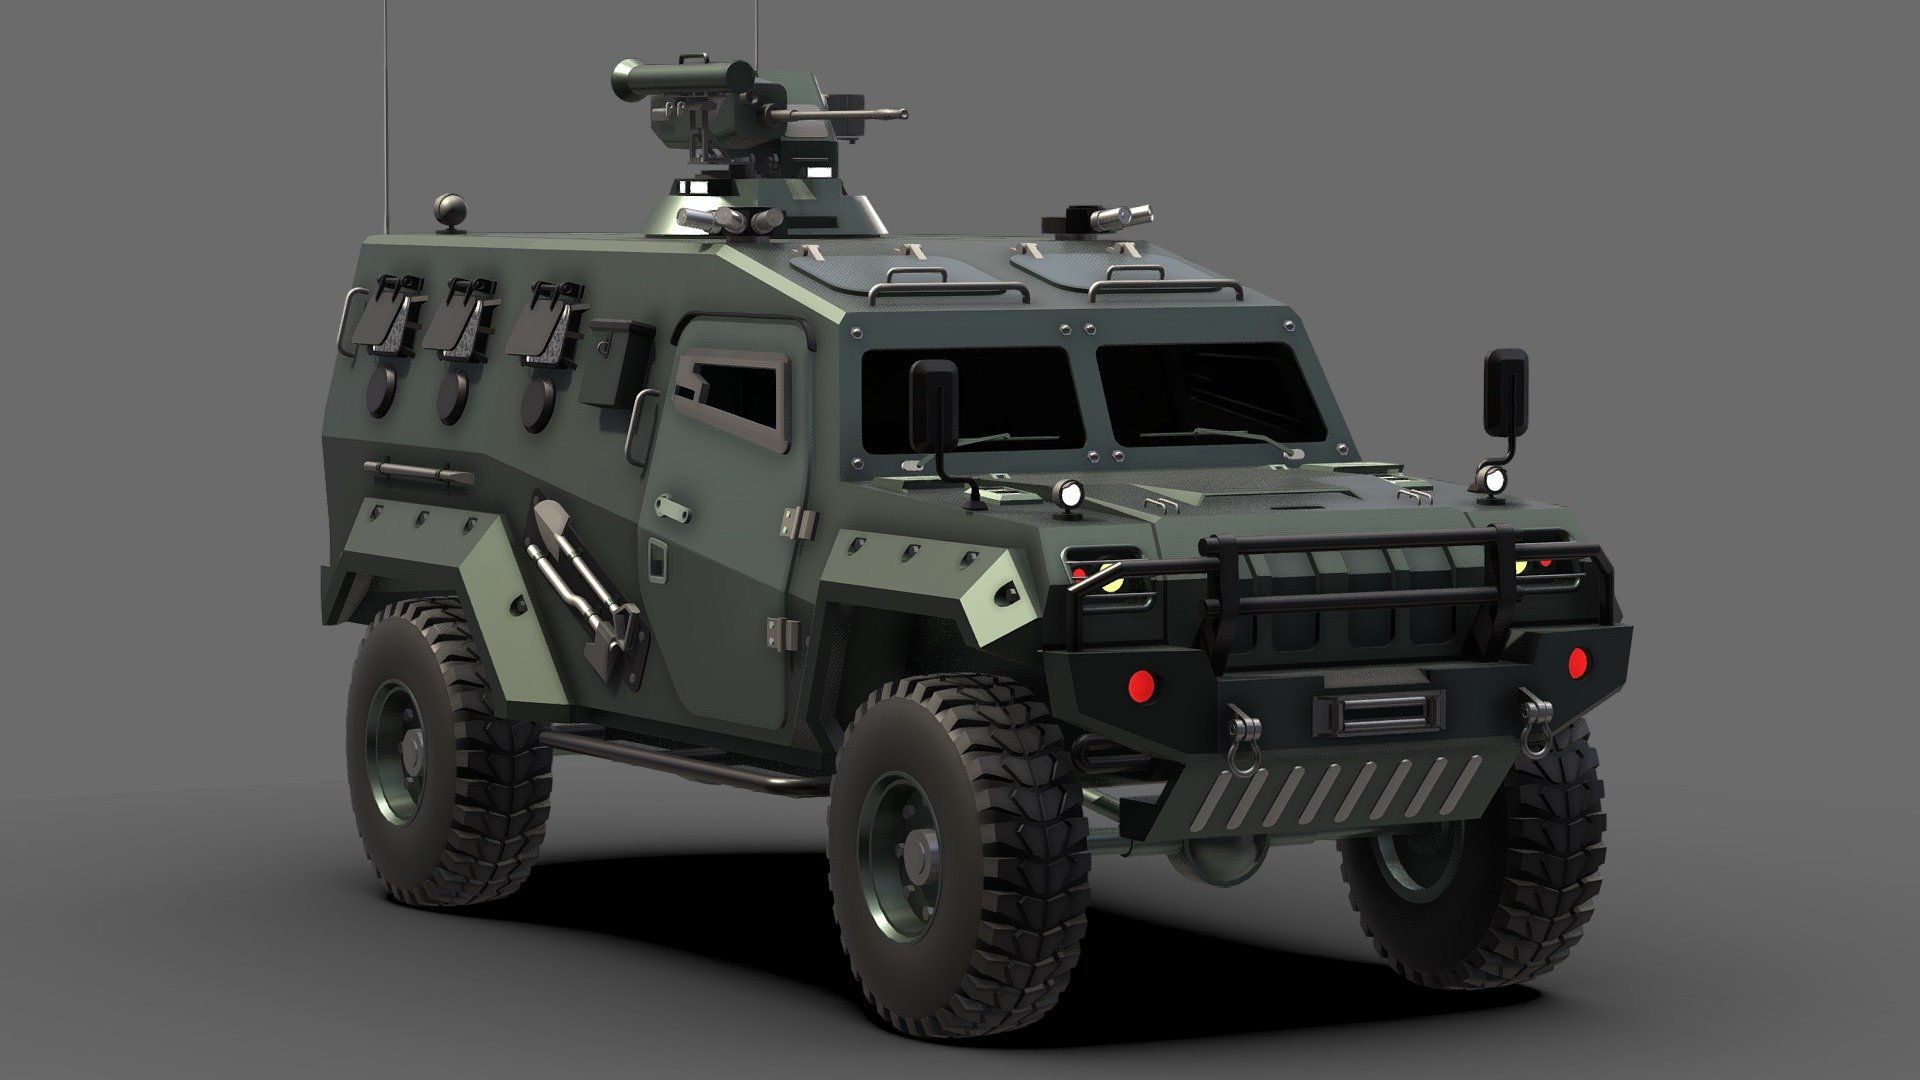 The Pindad Komodo or Pindad Dragon for export markets is a 4x4 light armored car developed and produced by Pindad. The vehicle was developed after Indonesian president Susilo Bambang Yudhoyono made a visit to Pindad's main office and asked them to create an indigenous tactical vehicle in order to serve the needs of the Indonesian police and military as an alternative to other 4x4 tactical vehicles such as the Humvee as a personal challenge to the company 3d model